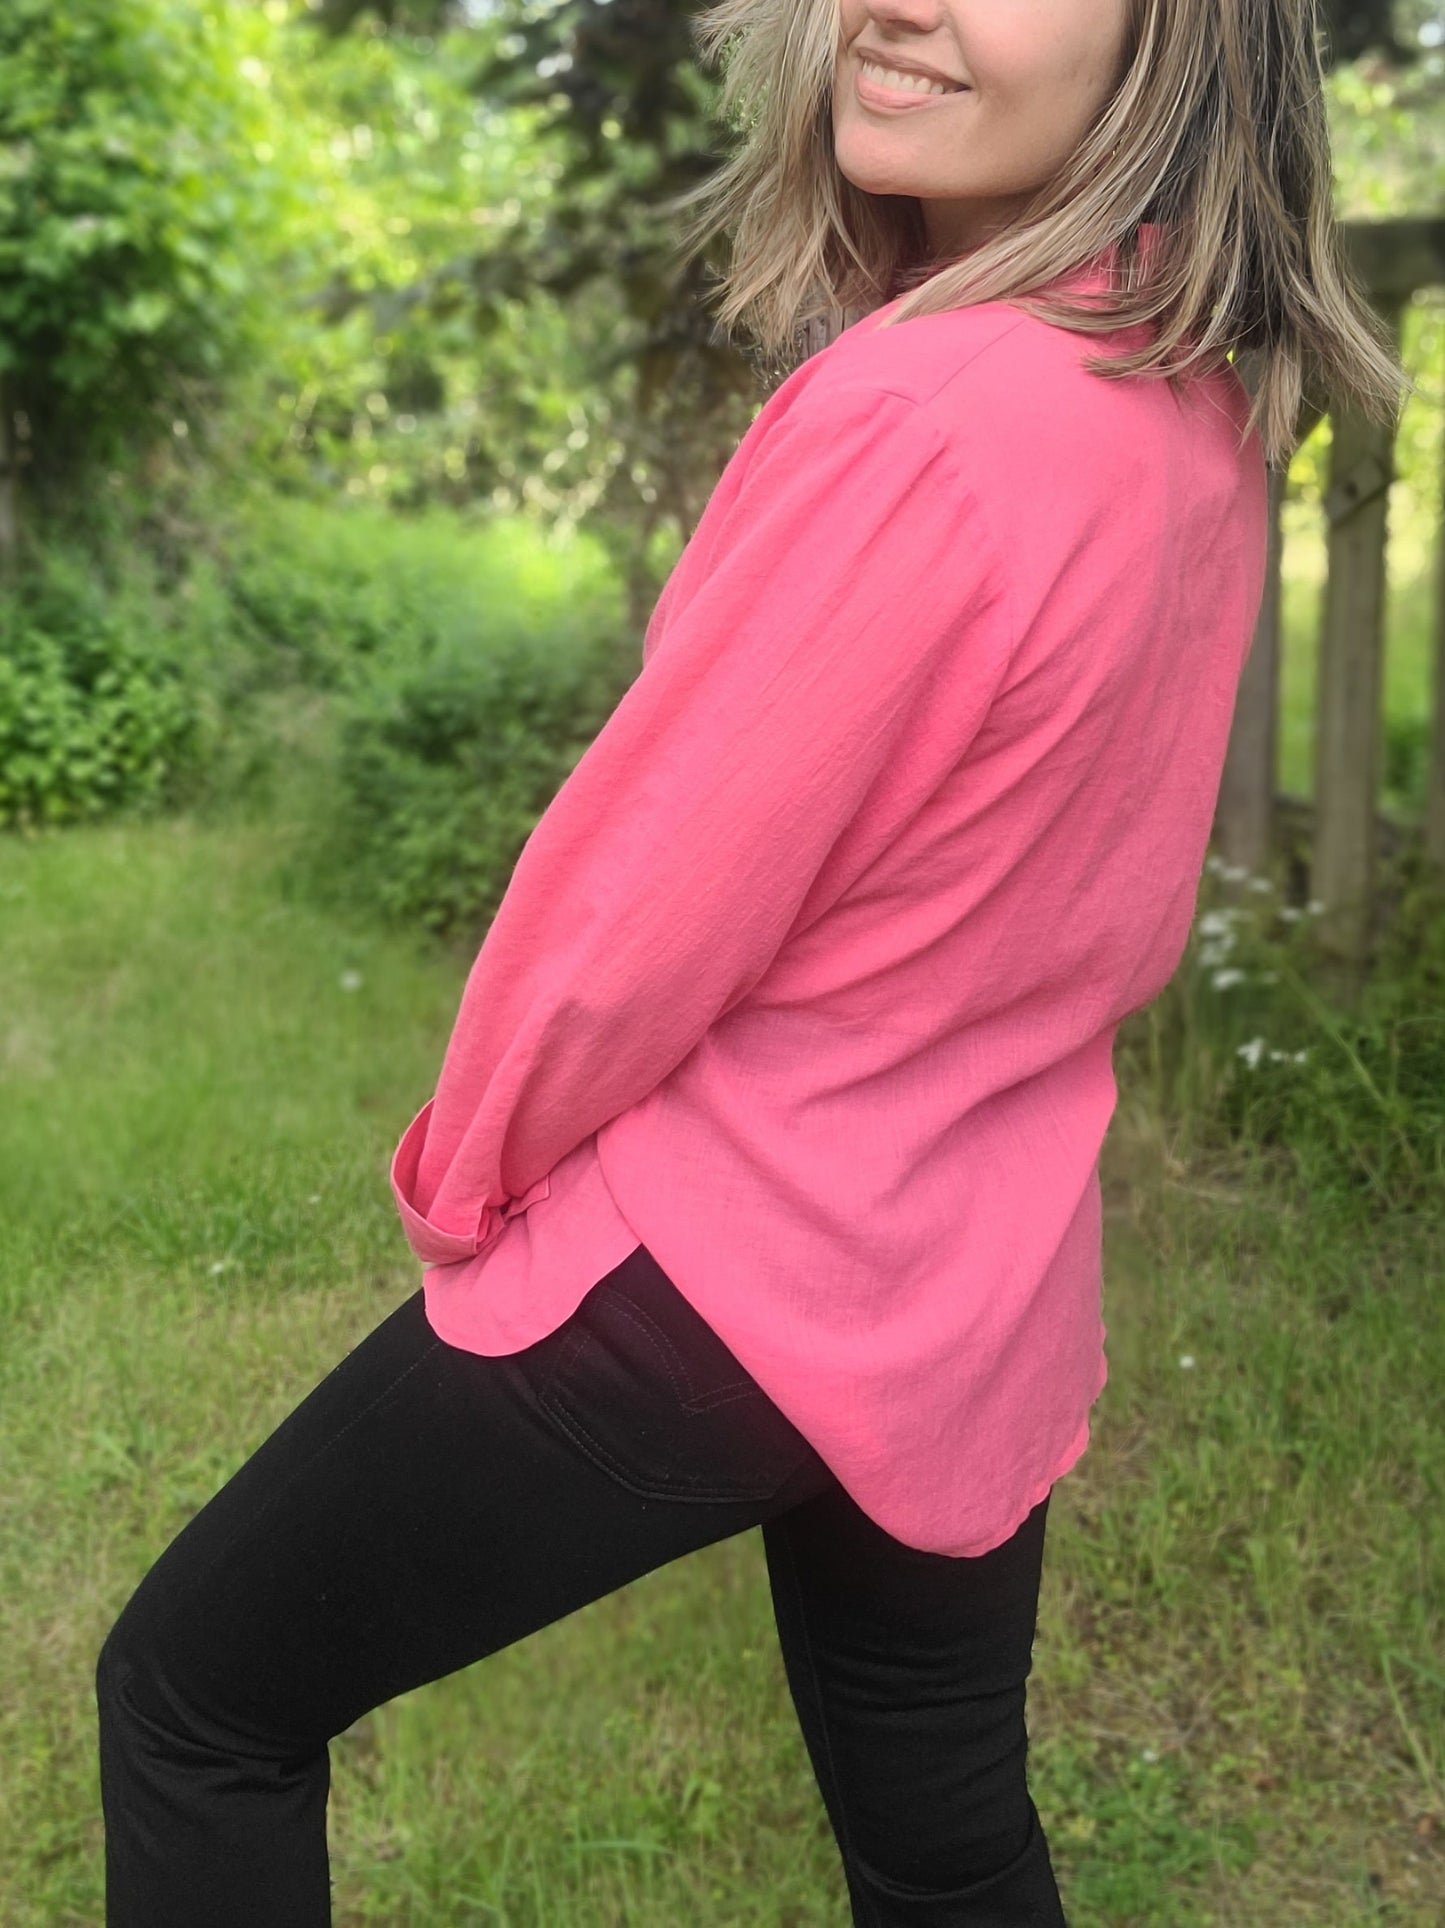 The Linda Lundstrom Hot Pink Button Down S